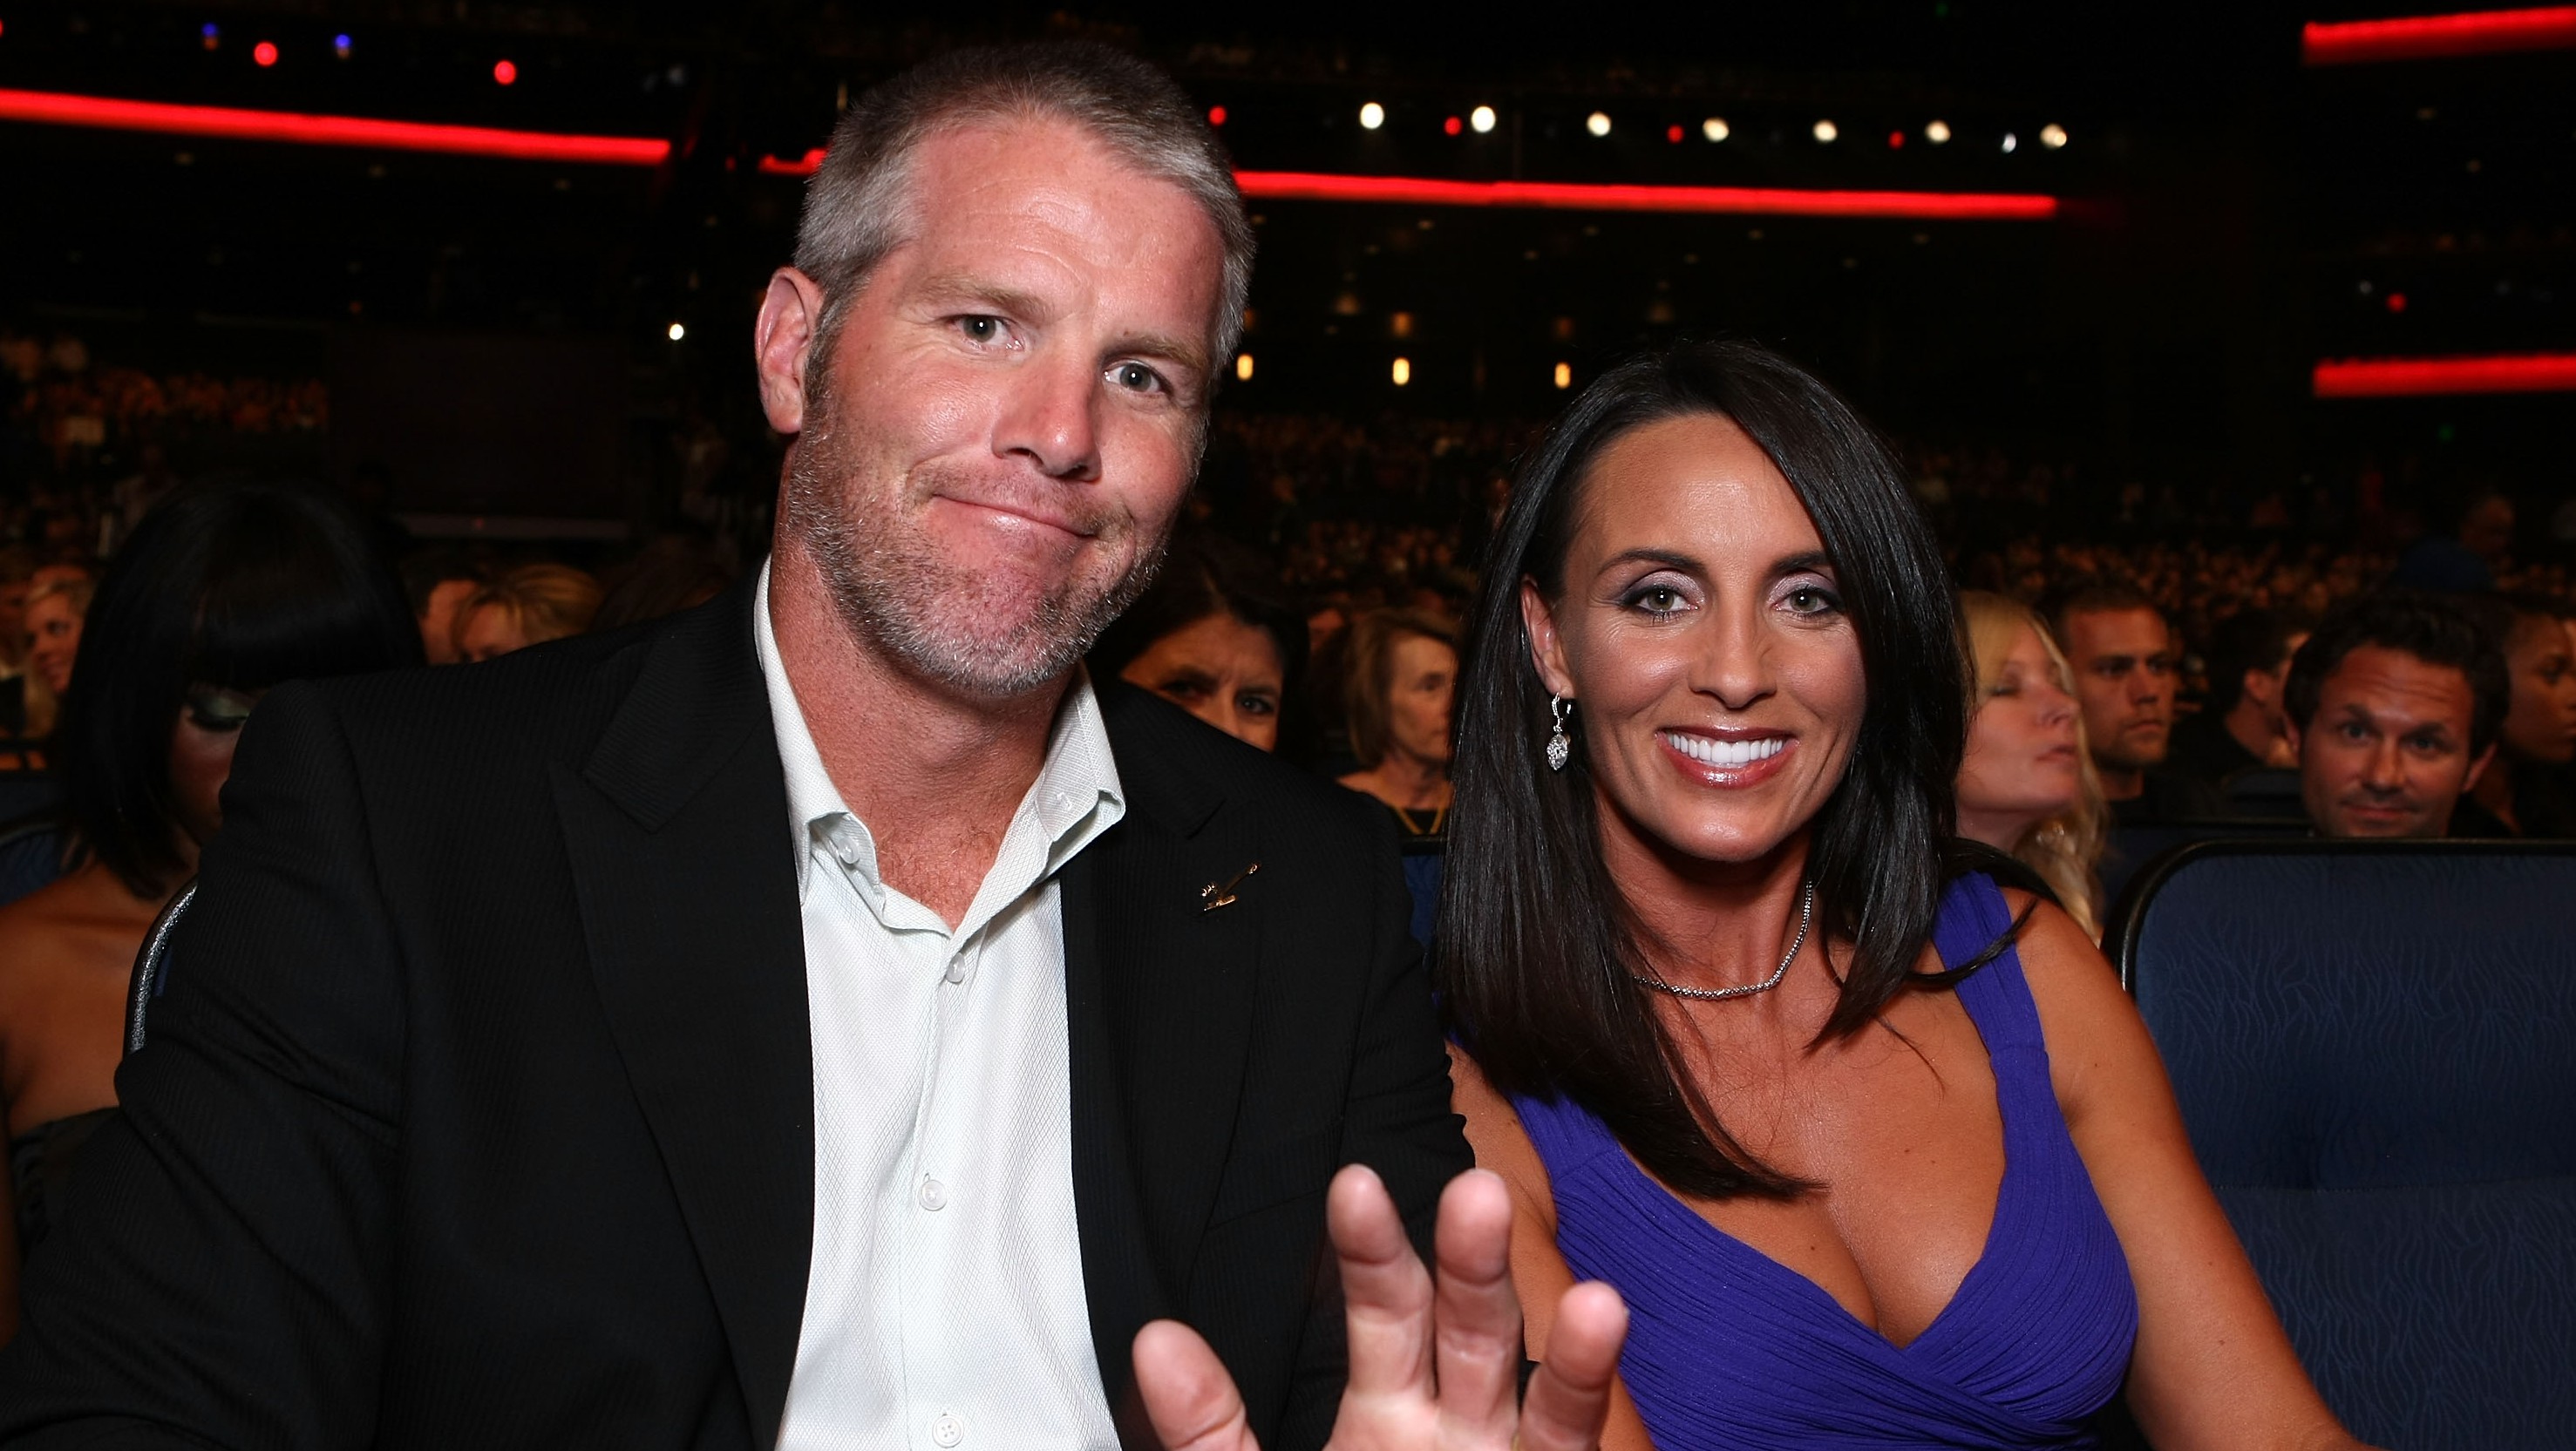 Deanna Favre, BrettпїЅs Wife 5 Fast Facts You Need to Kno